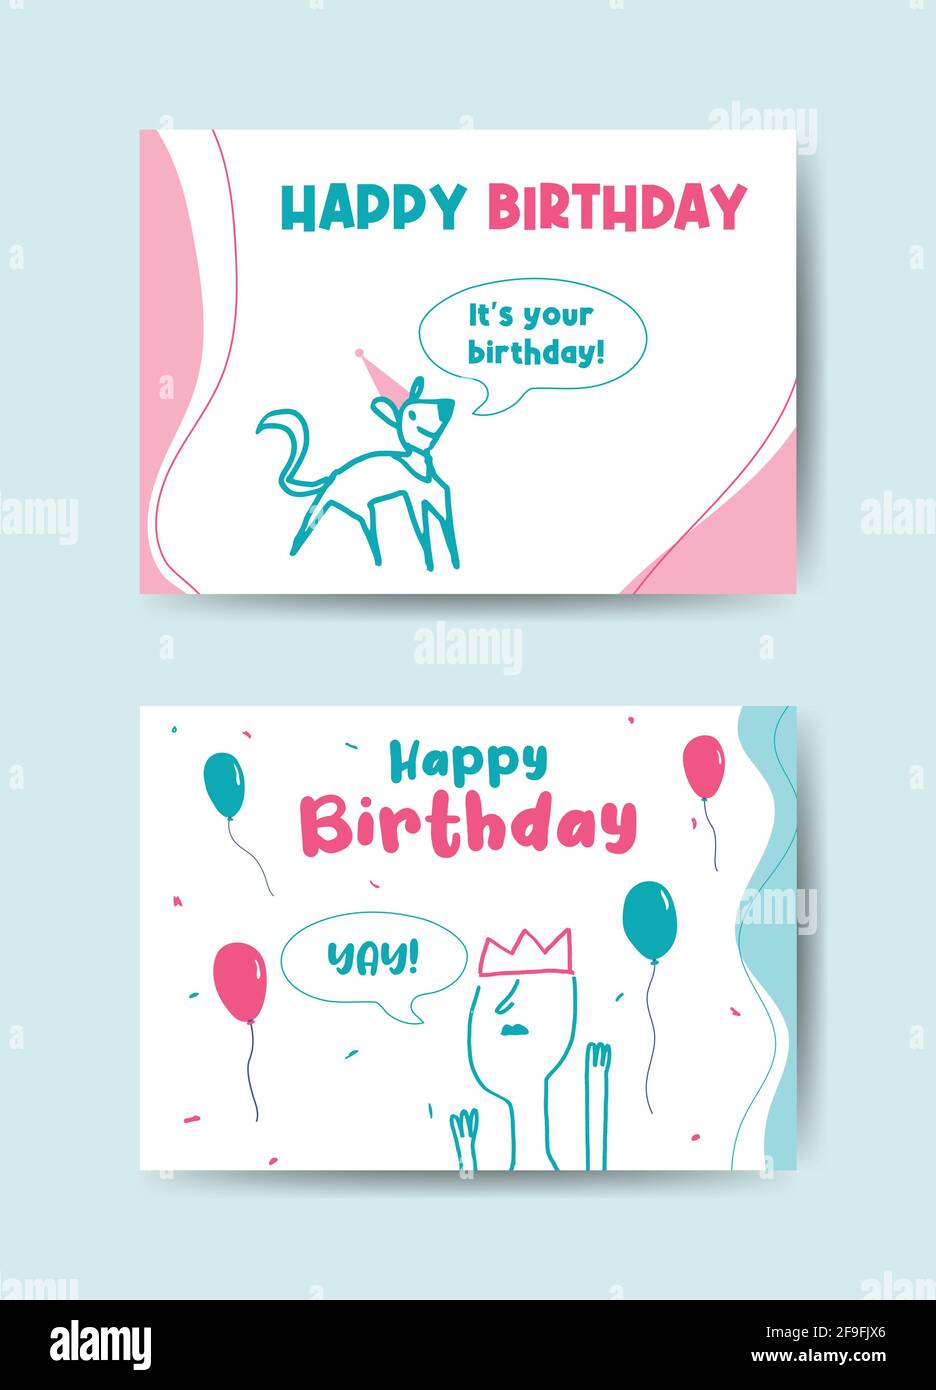 2 happy birthday horizontal cards template design, pastel colors with ...